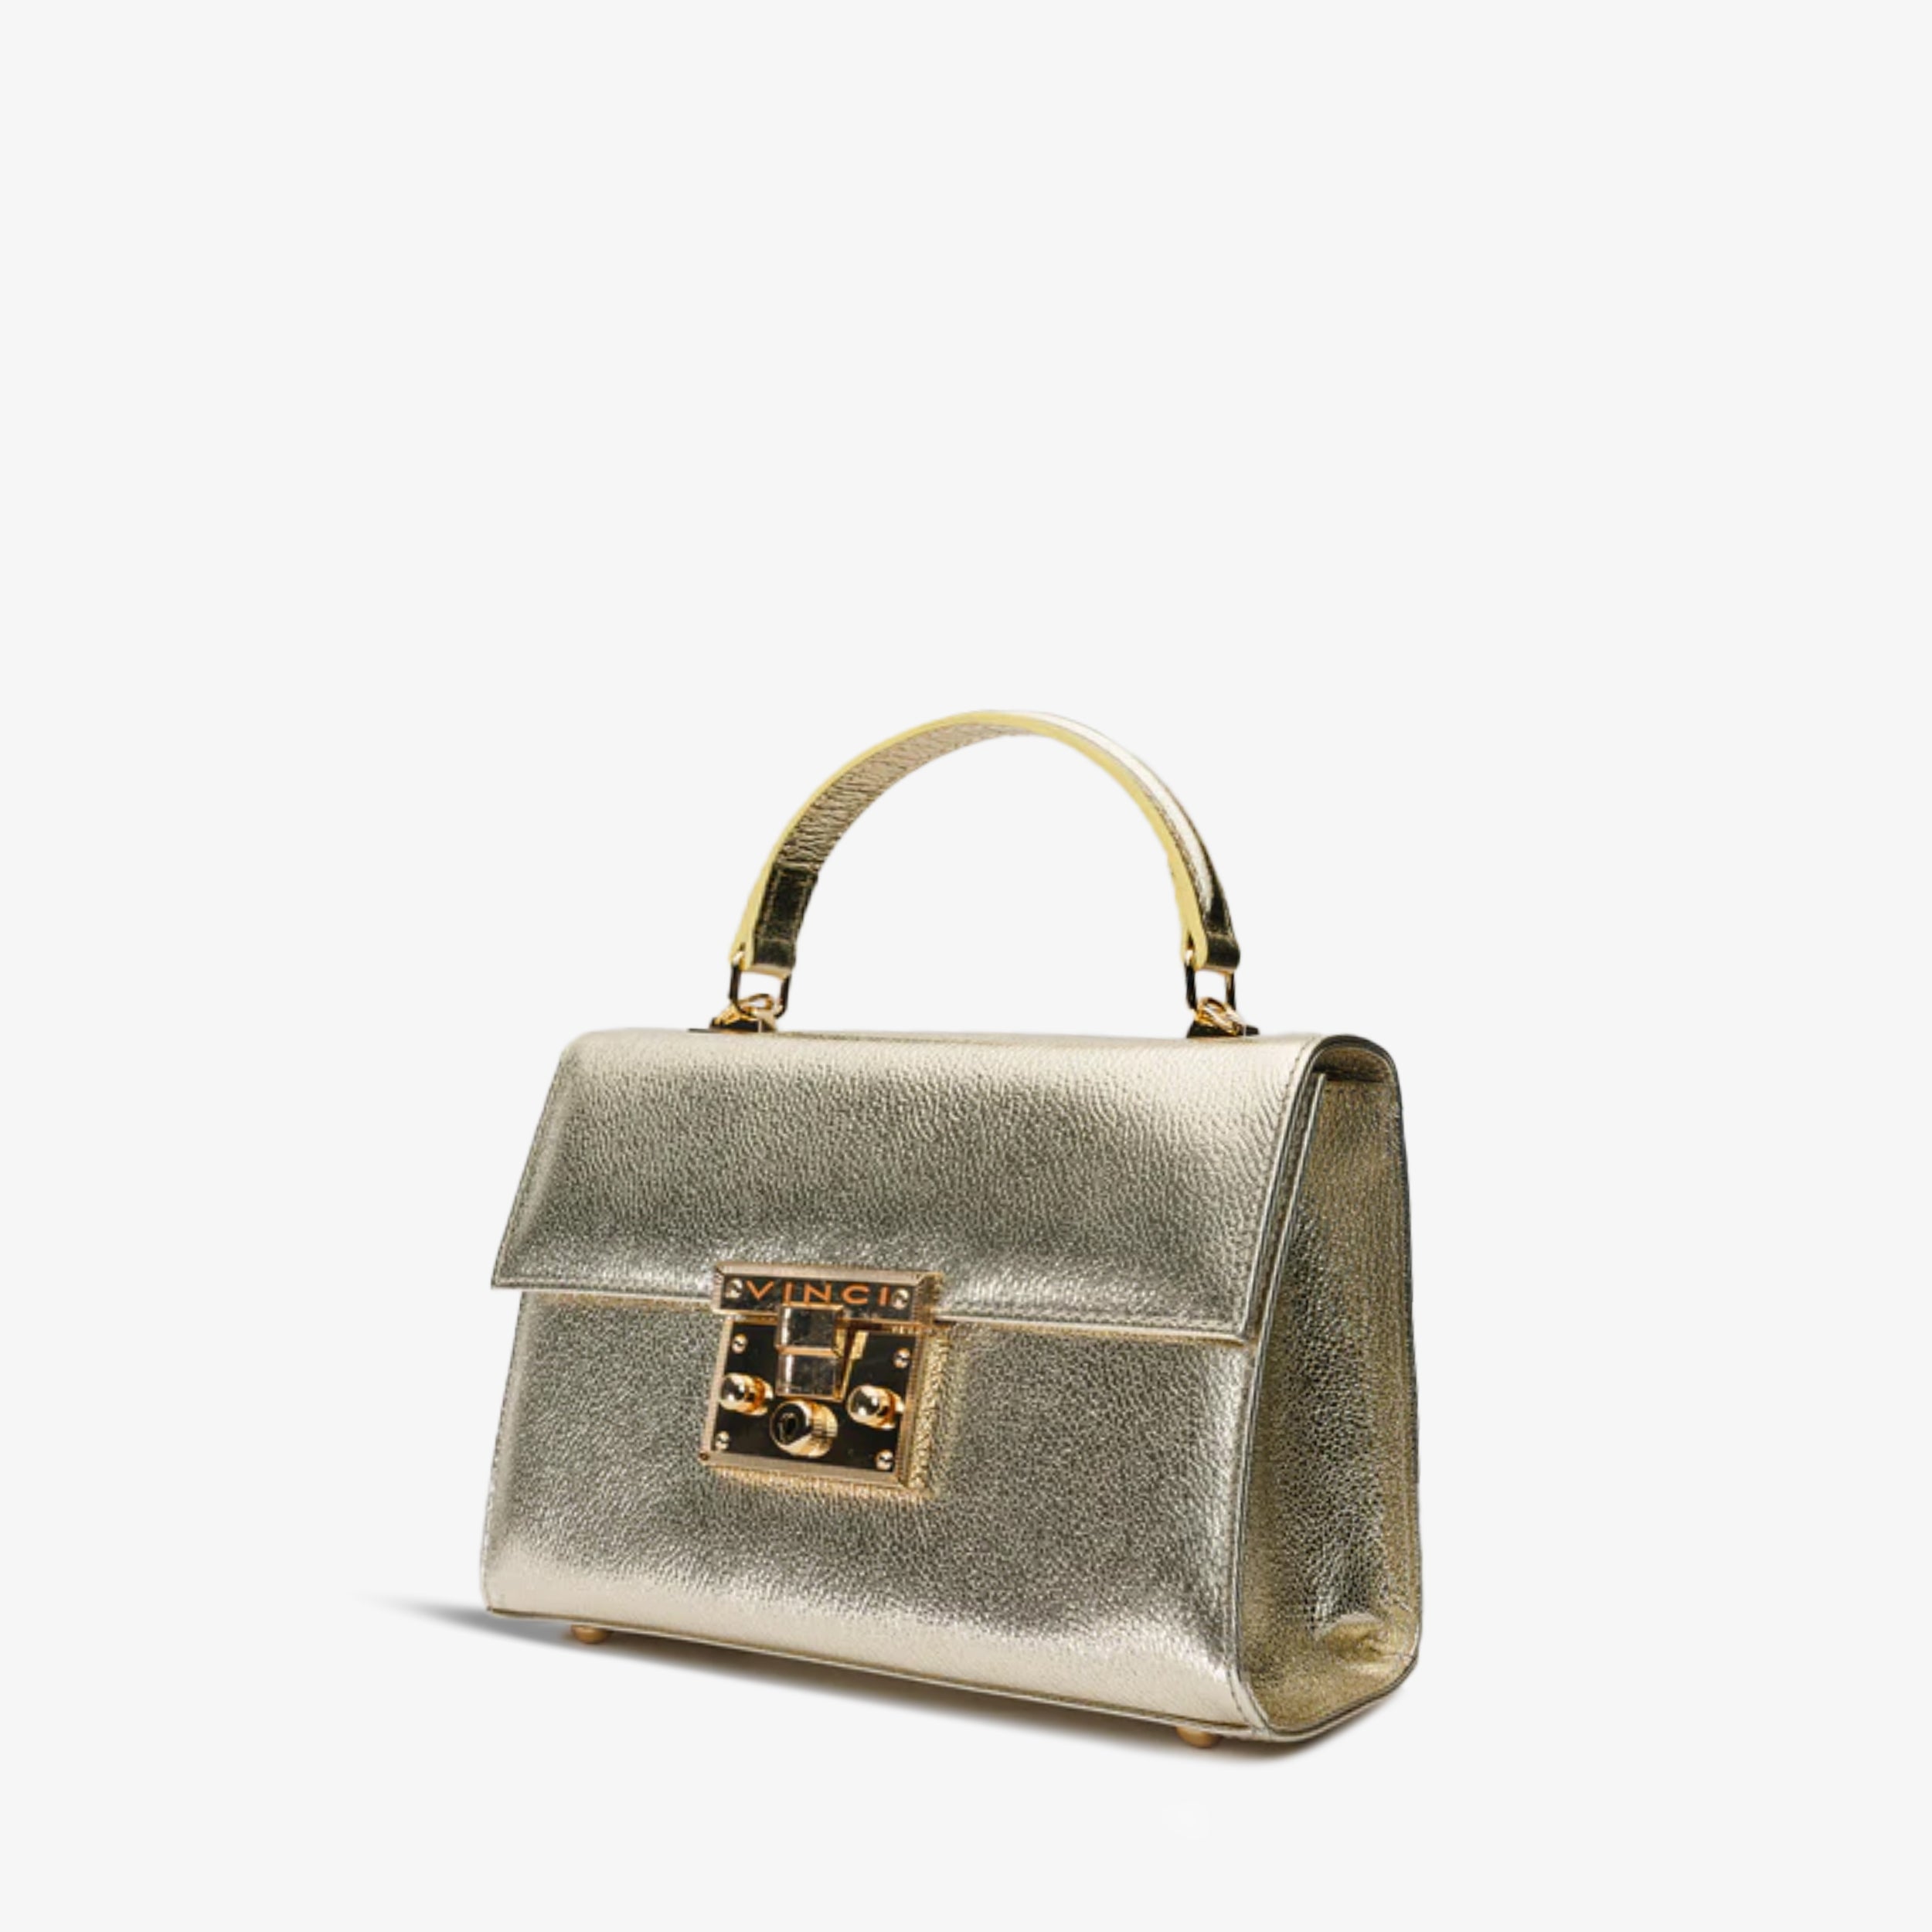 The Ege Gold Leather Hanbag